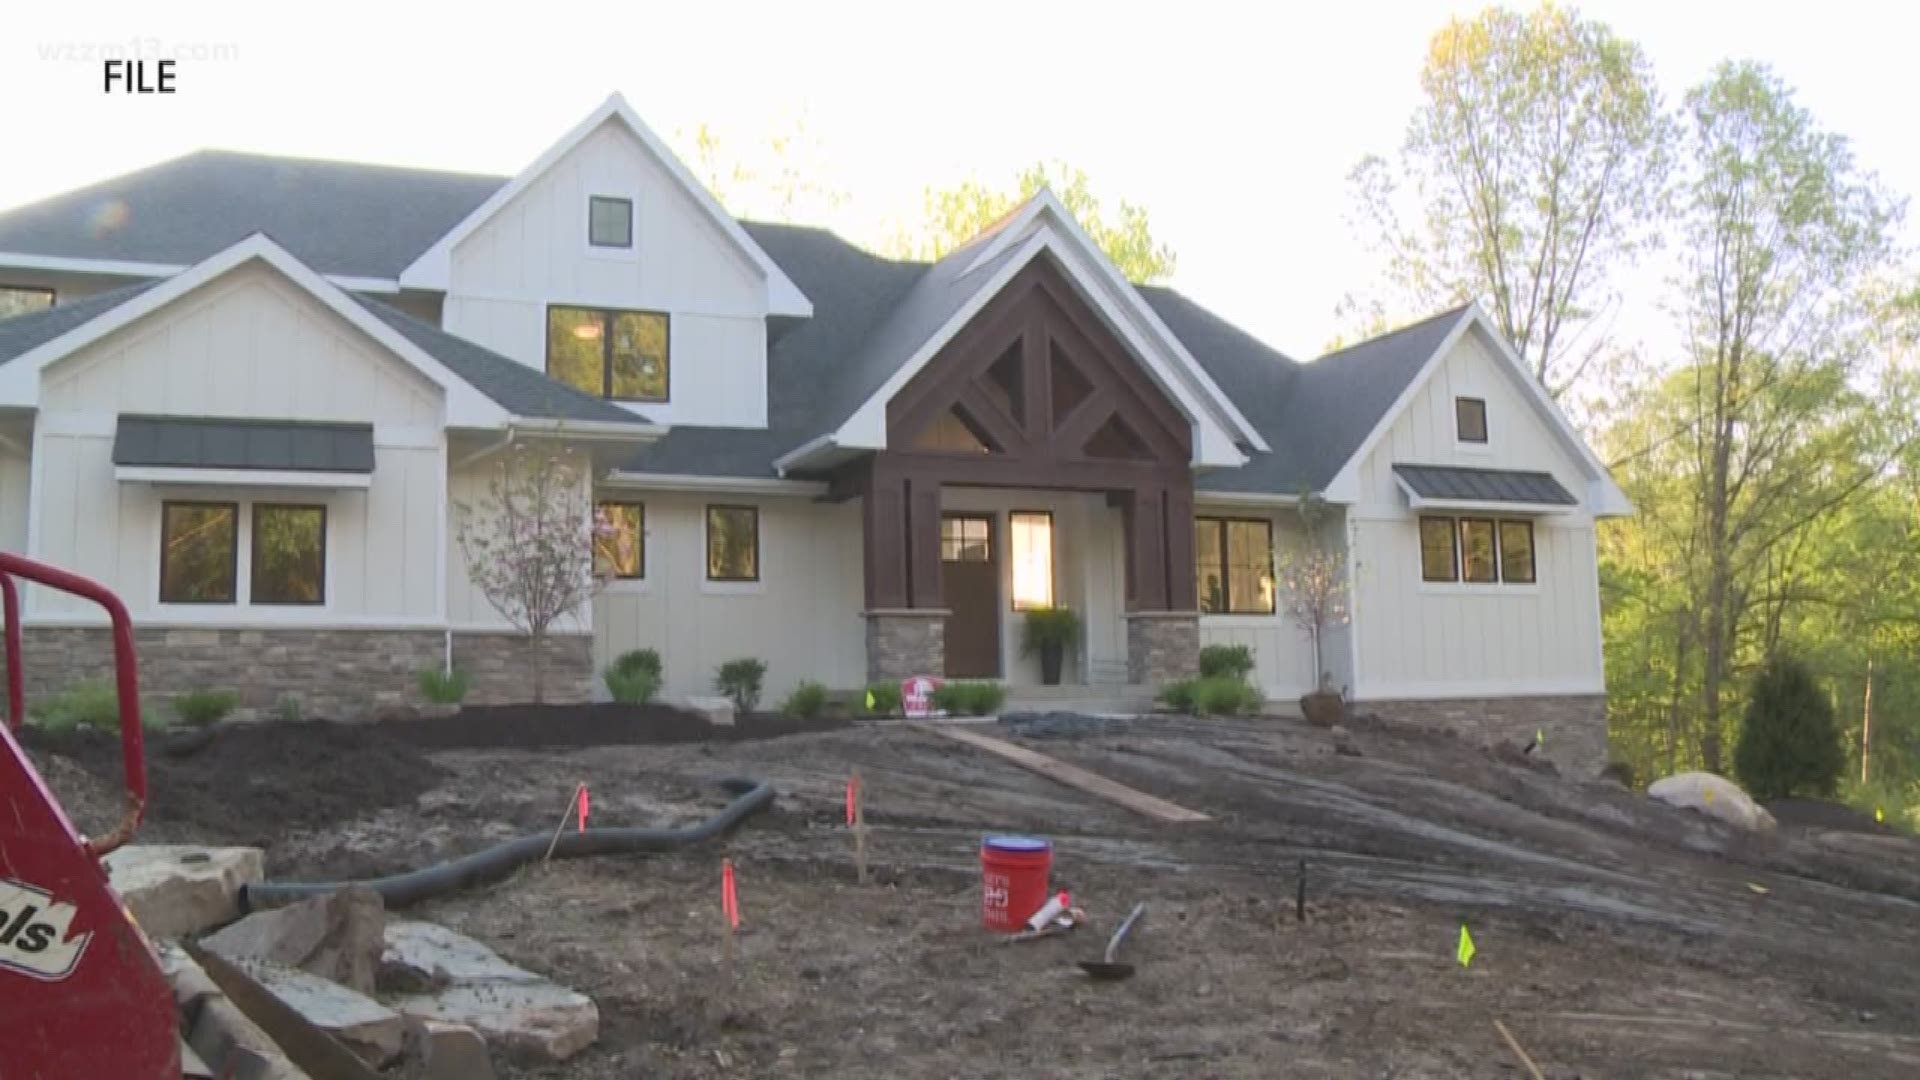 2019 Parade of Homes showcases new housing trends